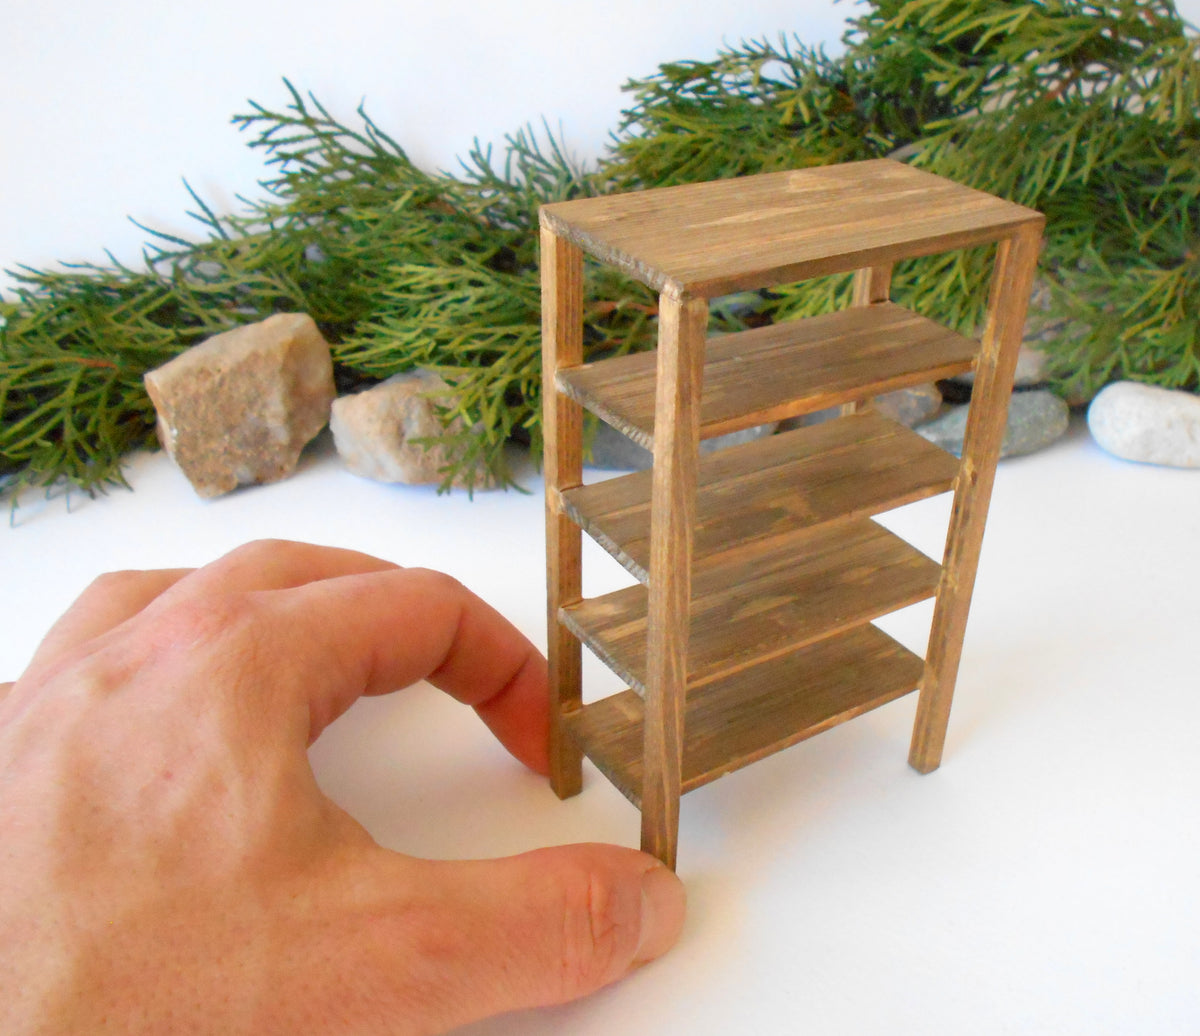 This is a Miniature shelf of wooden furniture that is approximately 1/12 in scale&lt;strong&gt;. &lt;/strong&gt;I have stained the shelf with light brown Italian eco-friendly mordant.&amp;nbsp;